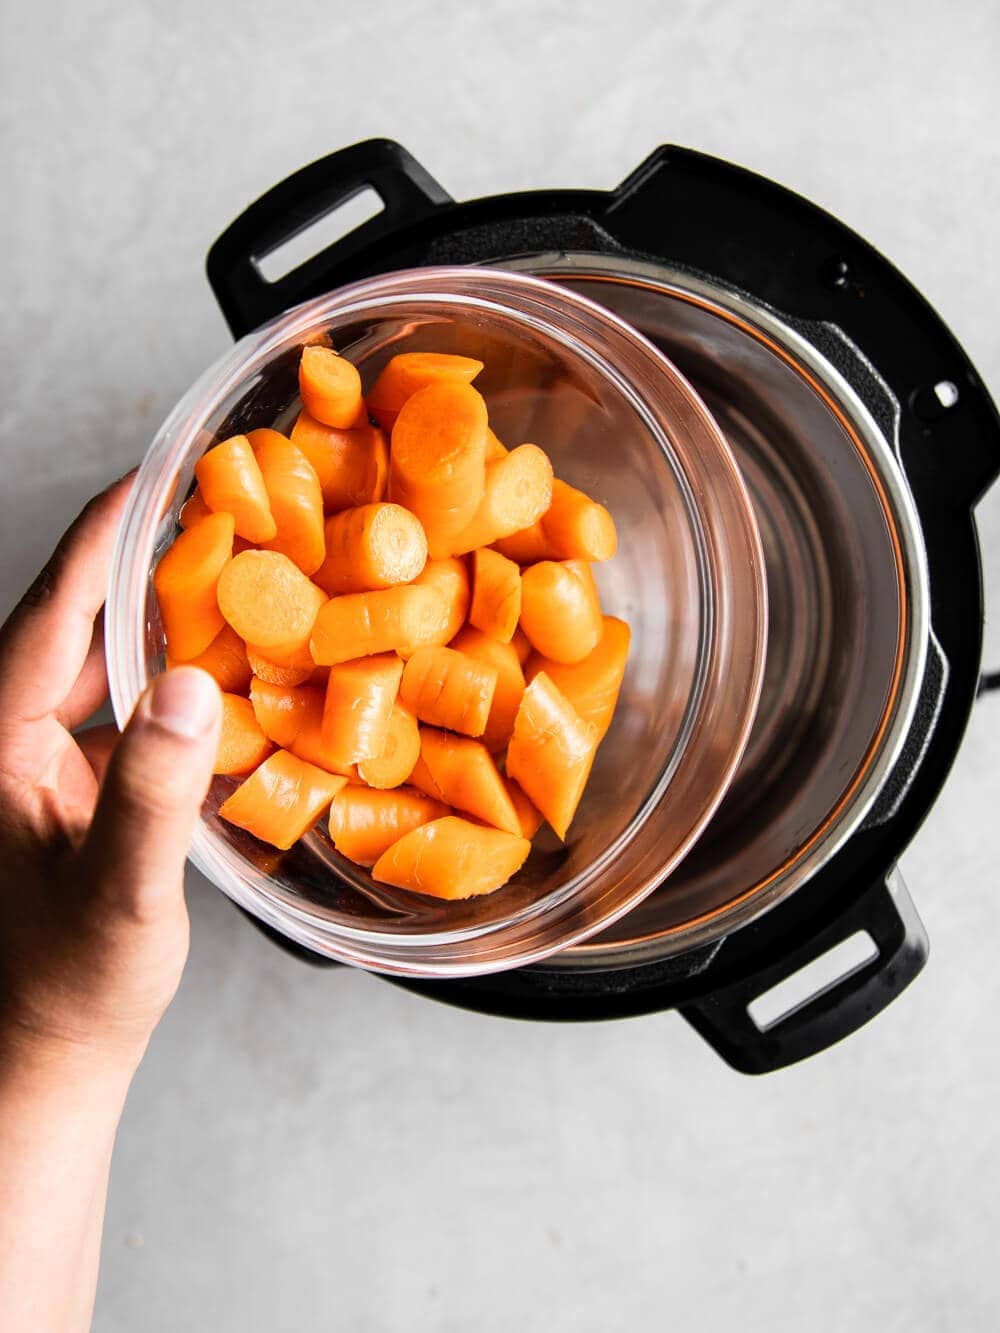 Hand pouring a bowl of chopped carrots into the insert of the Instant Pot.